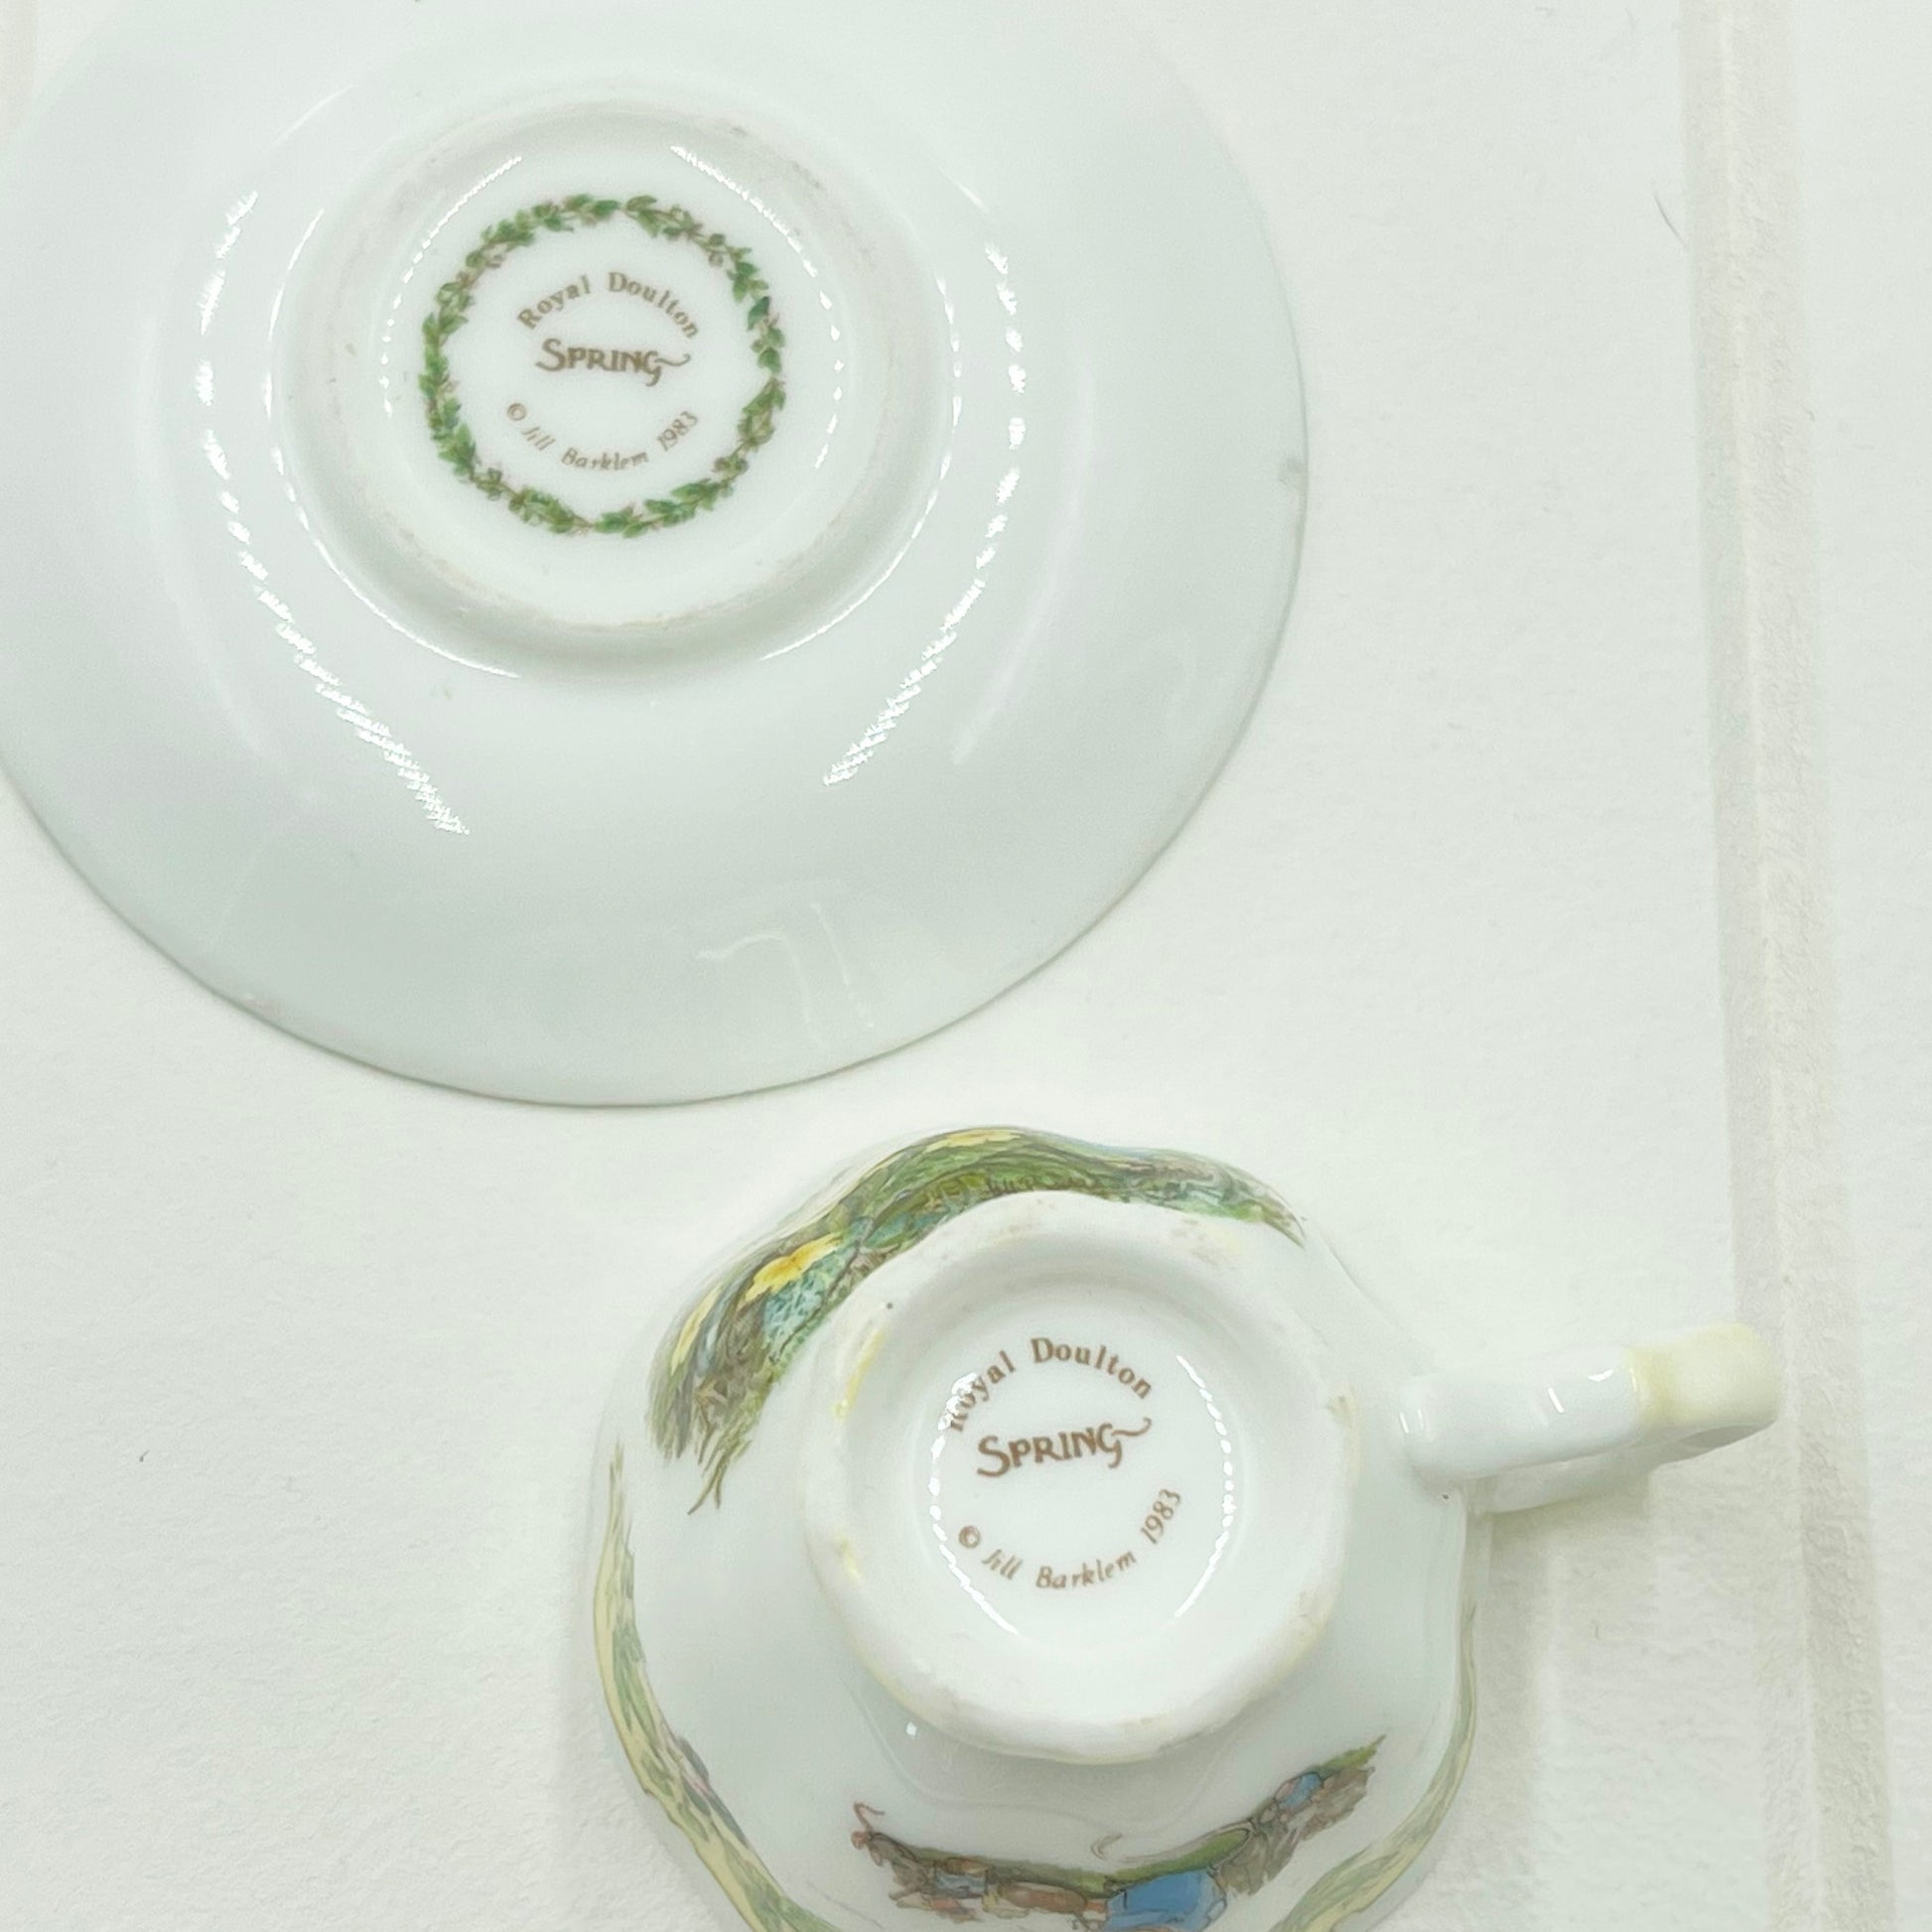 Royal Doulton Brambly Hedge Miniature Spring Teacup and Saucer Duo